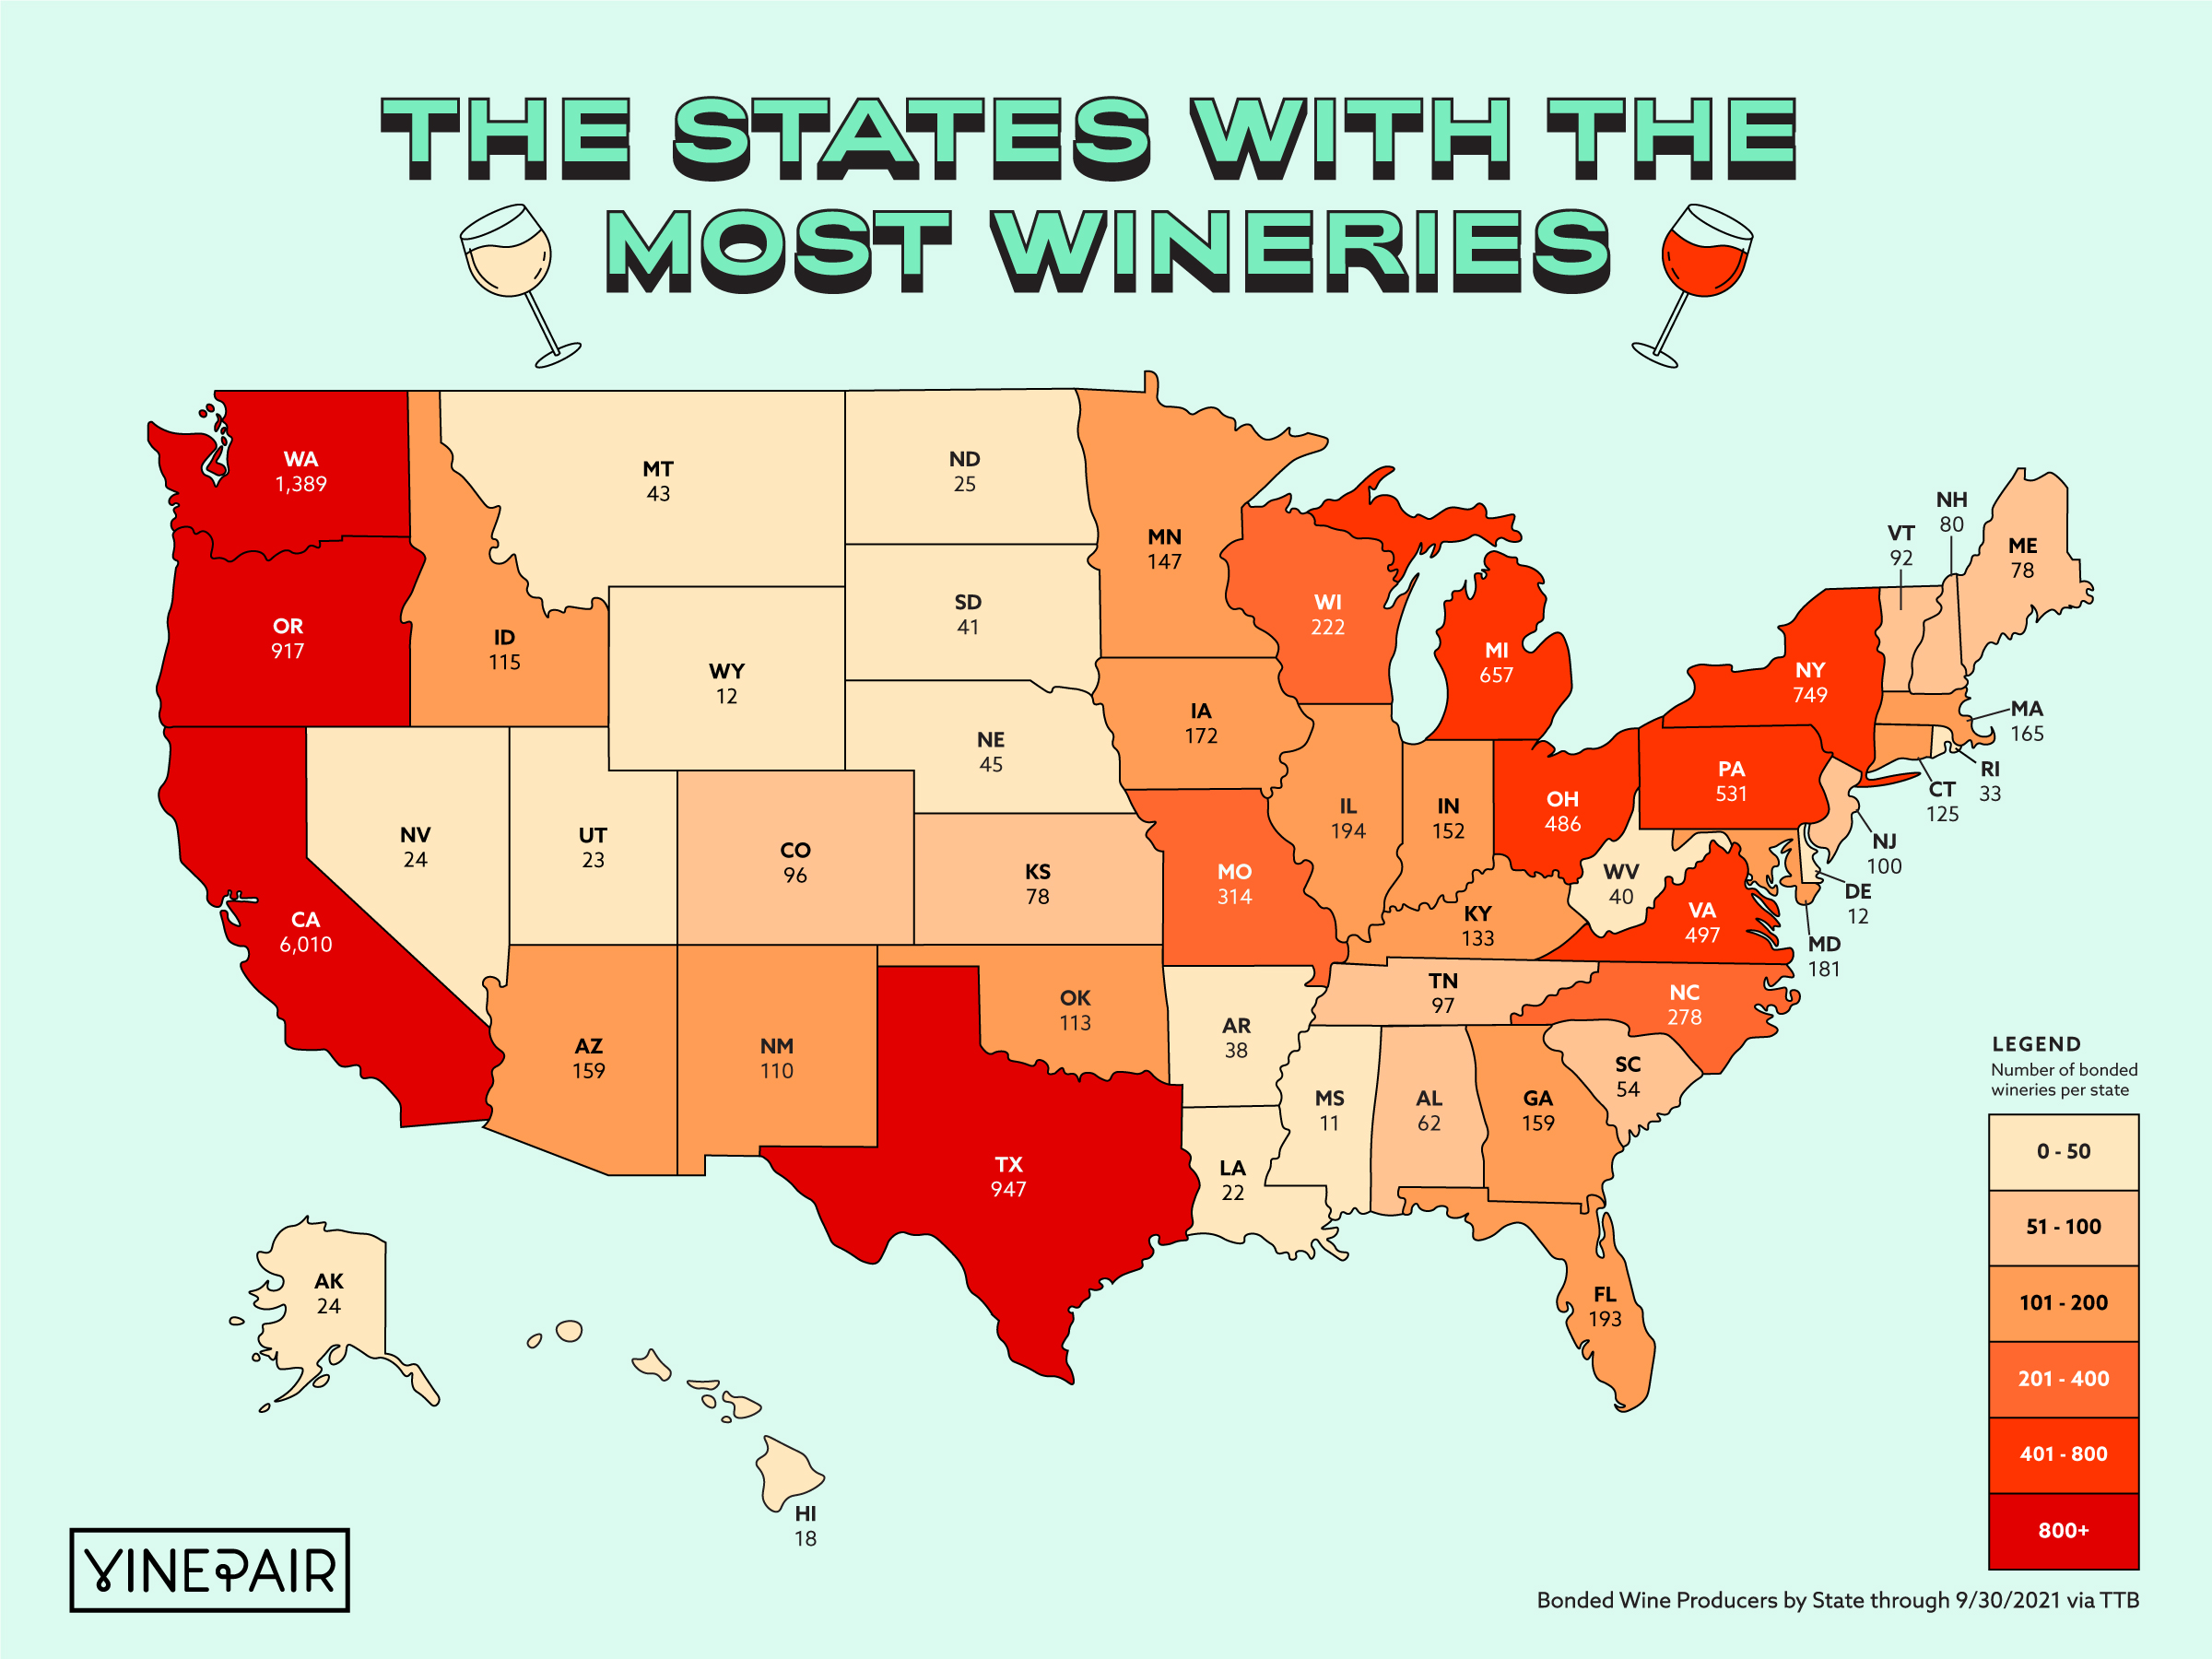 These are the states with the most wineries